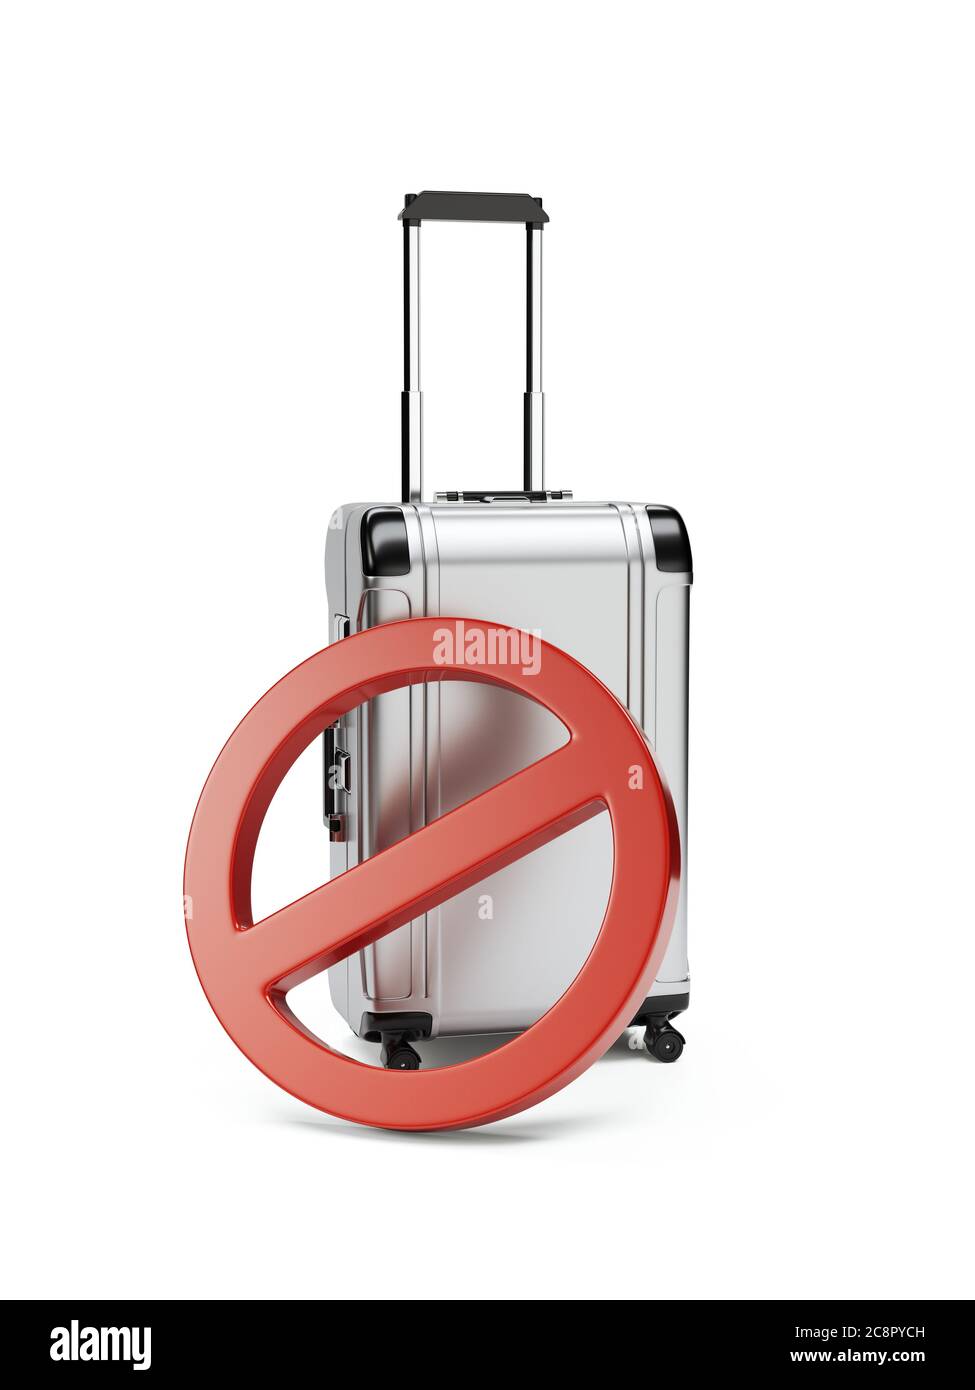 2019-nCoV corona  coronavirus pandemic caution concept with travel suitcase and red circle prohibition sign. 3d rendering illustration Stock Photo